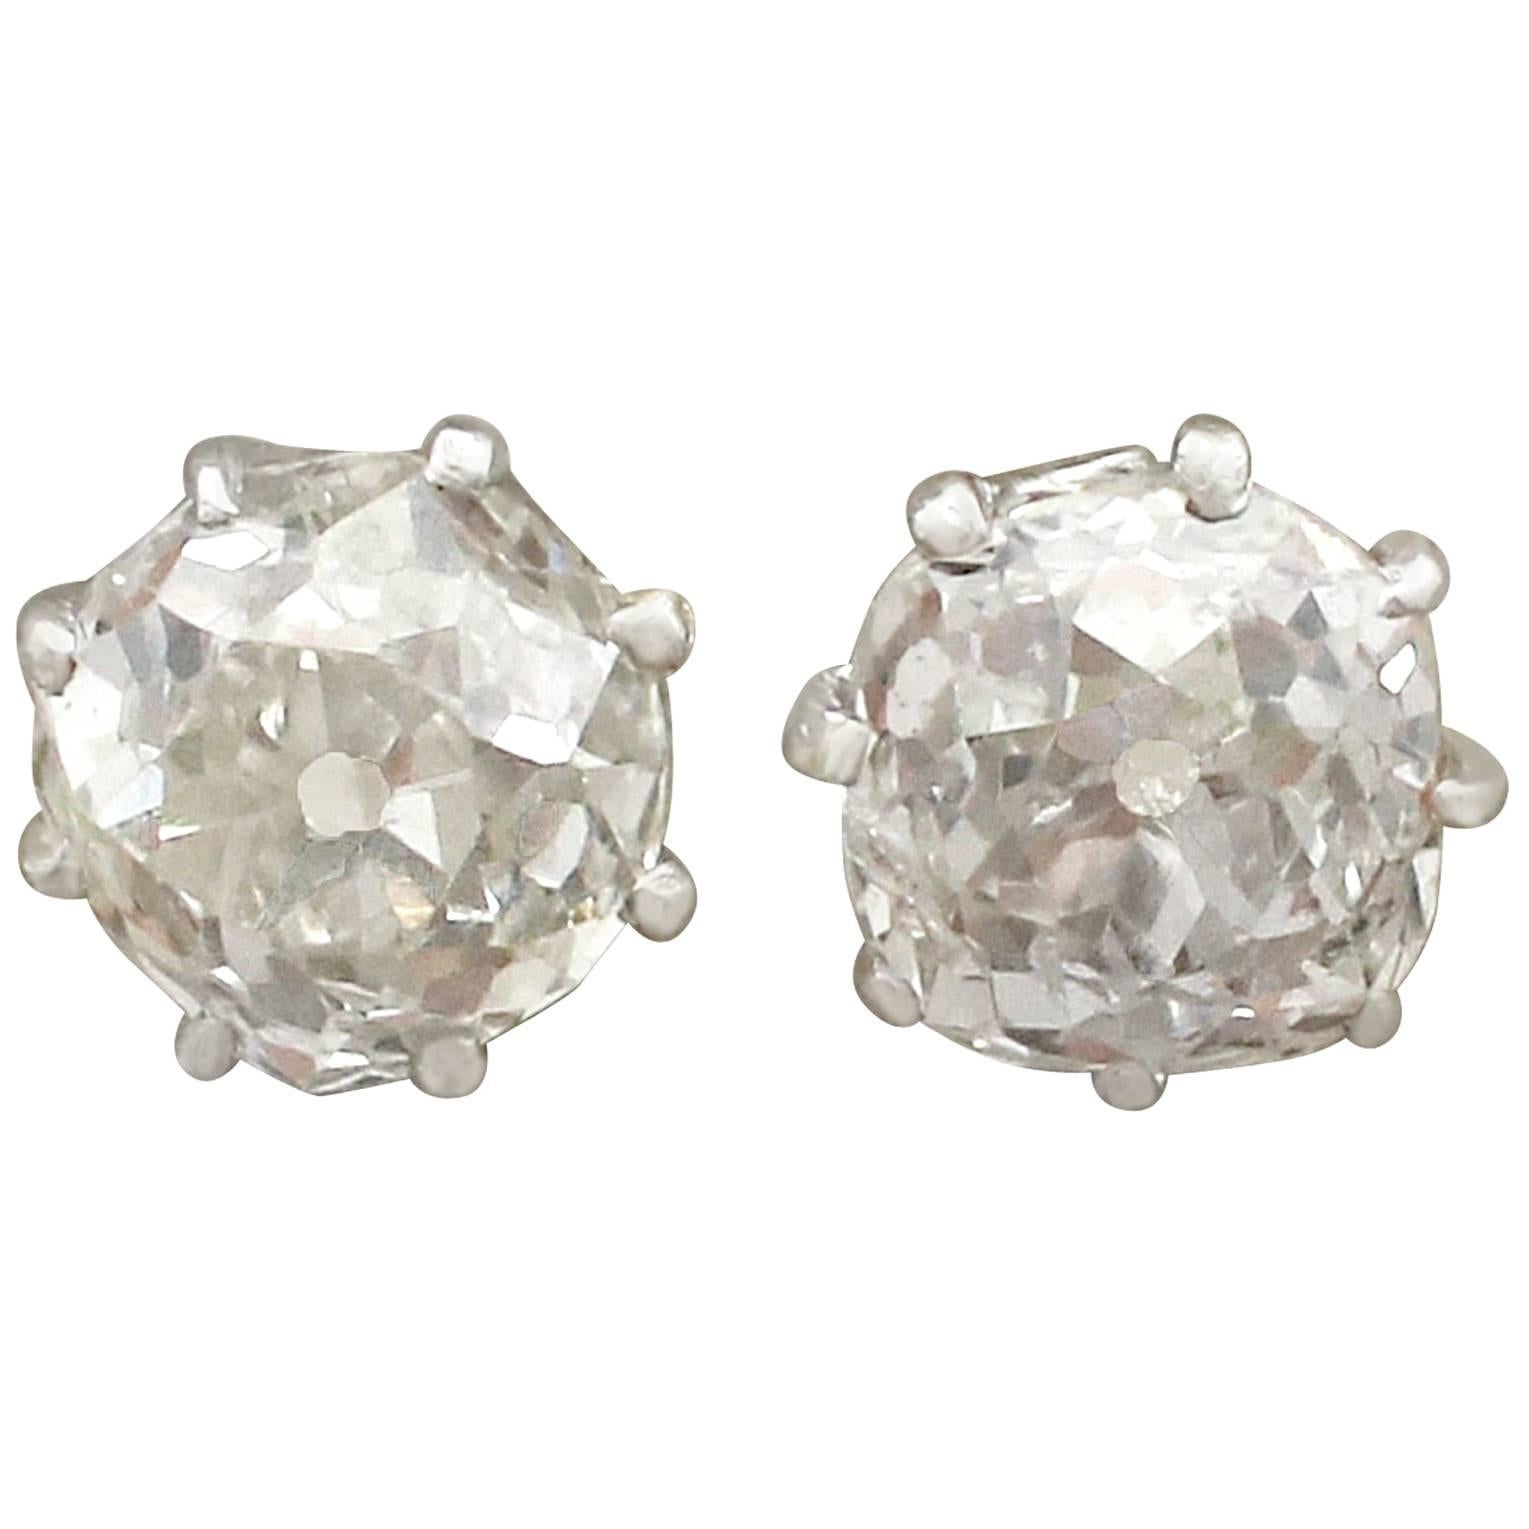 1900s Antique 1.78 Carat Diamond and White Gold Stud Earrings